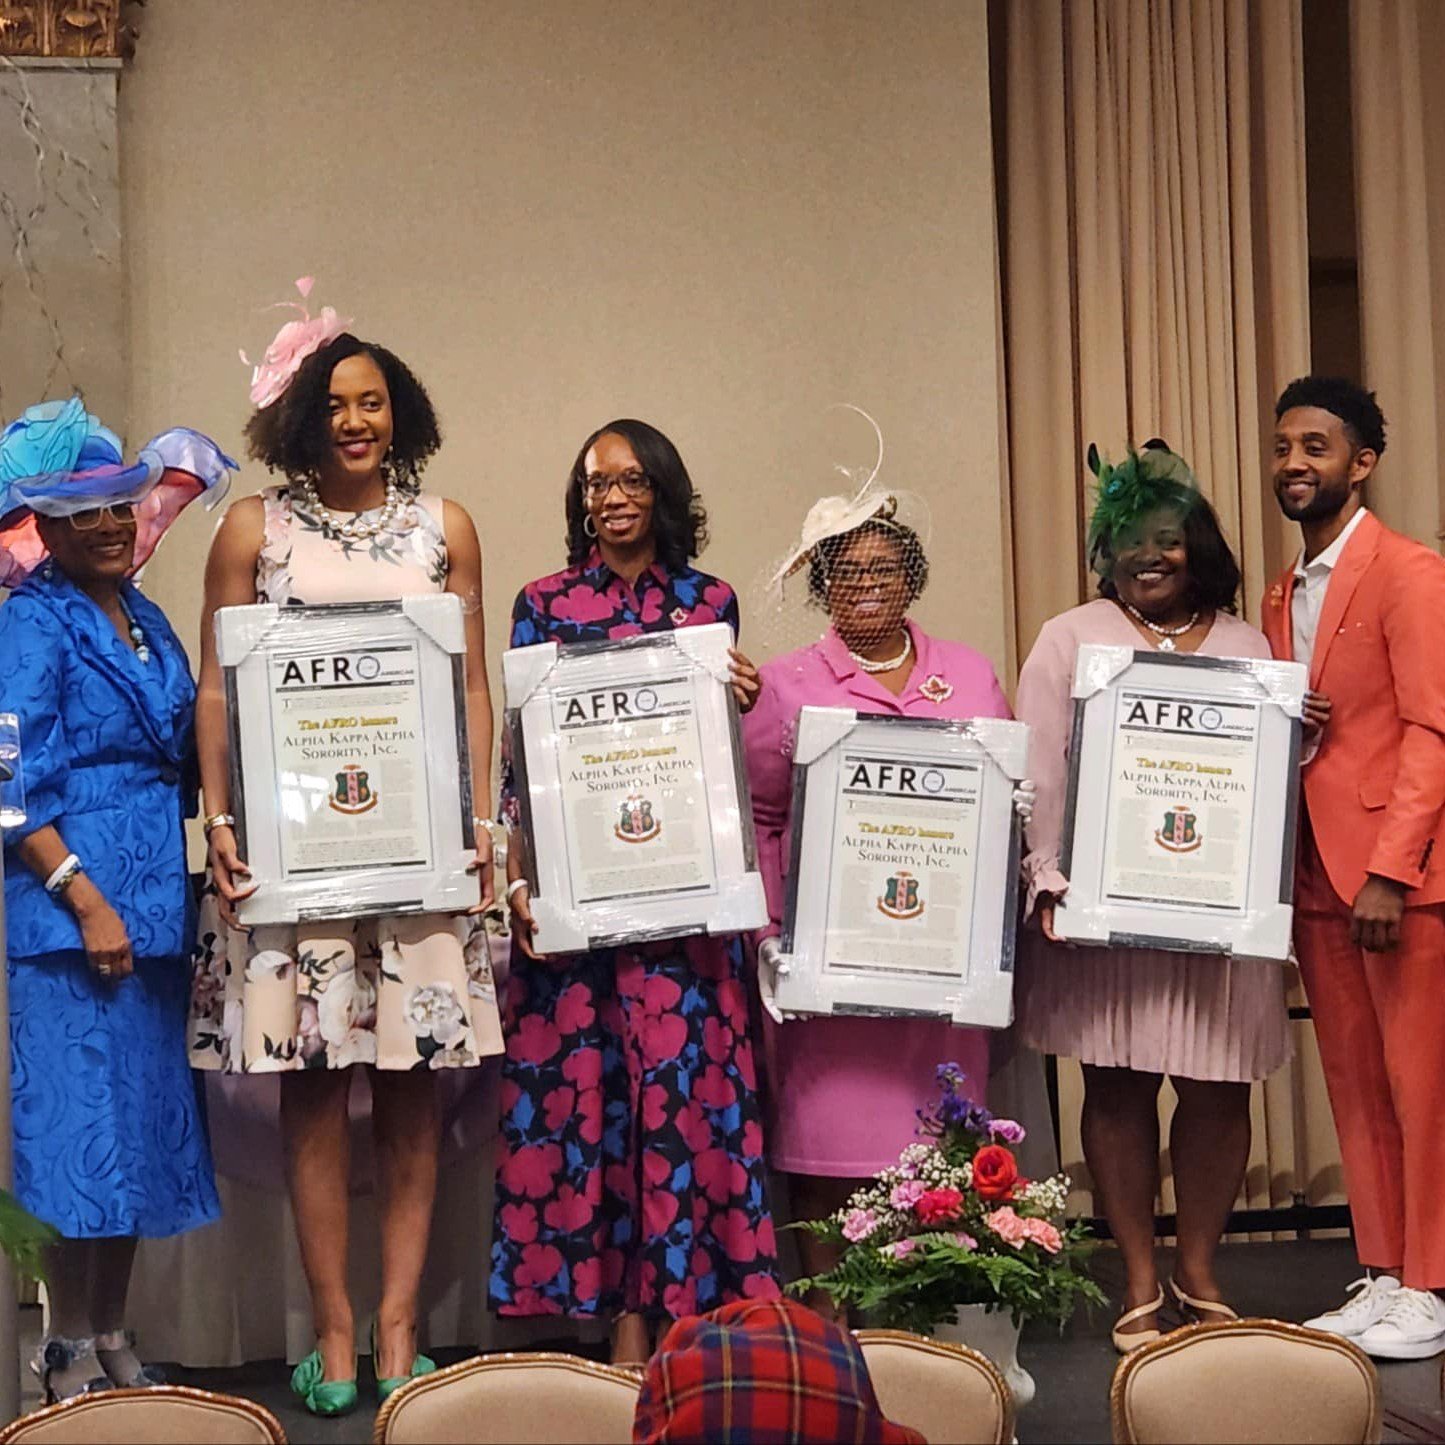 On Saturday, April 20th, Alpha Kappa Alpha Sorority, Inc.&reg; Upsilon Epsilon Omega Chapter had a &ldquo;pearlfect&rdquo; time at the Afro-American Newspapers Annual Tea: &ldquo;Salute to the Divine 9&rdquo;. It was wonderful being honored along wit